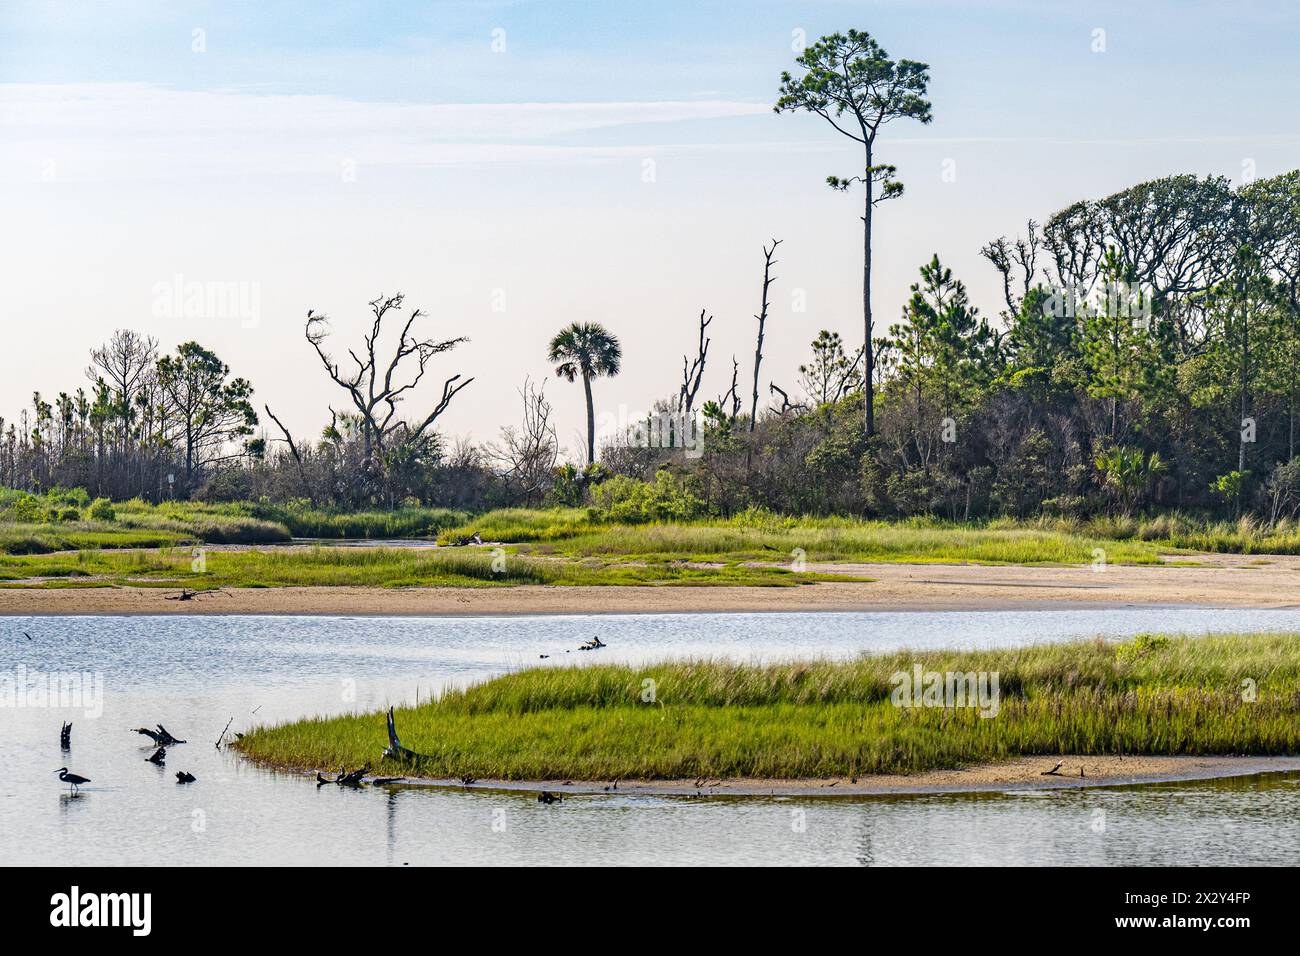 Spoonbill Pond at Boneyard Beach on the north end of Big Talbot Island (just across from Amelia Island) in Jacksonville, Florida. (USA) Stock Photo